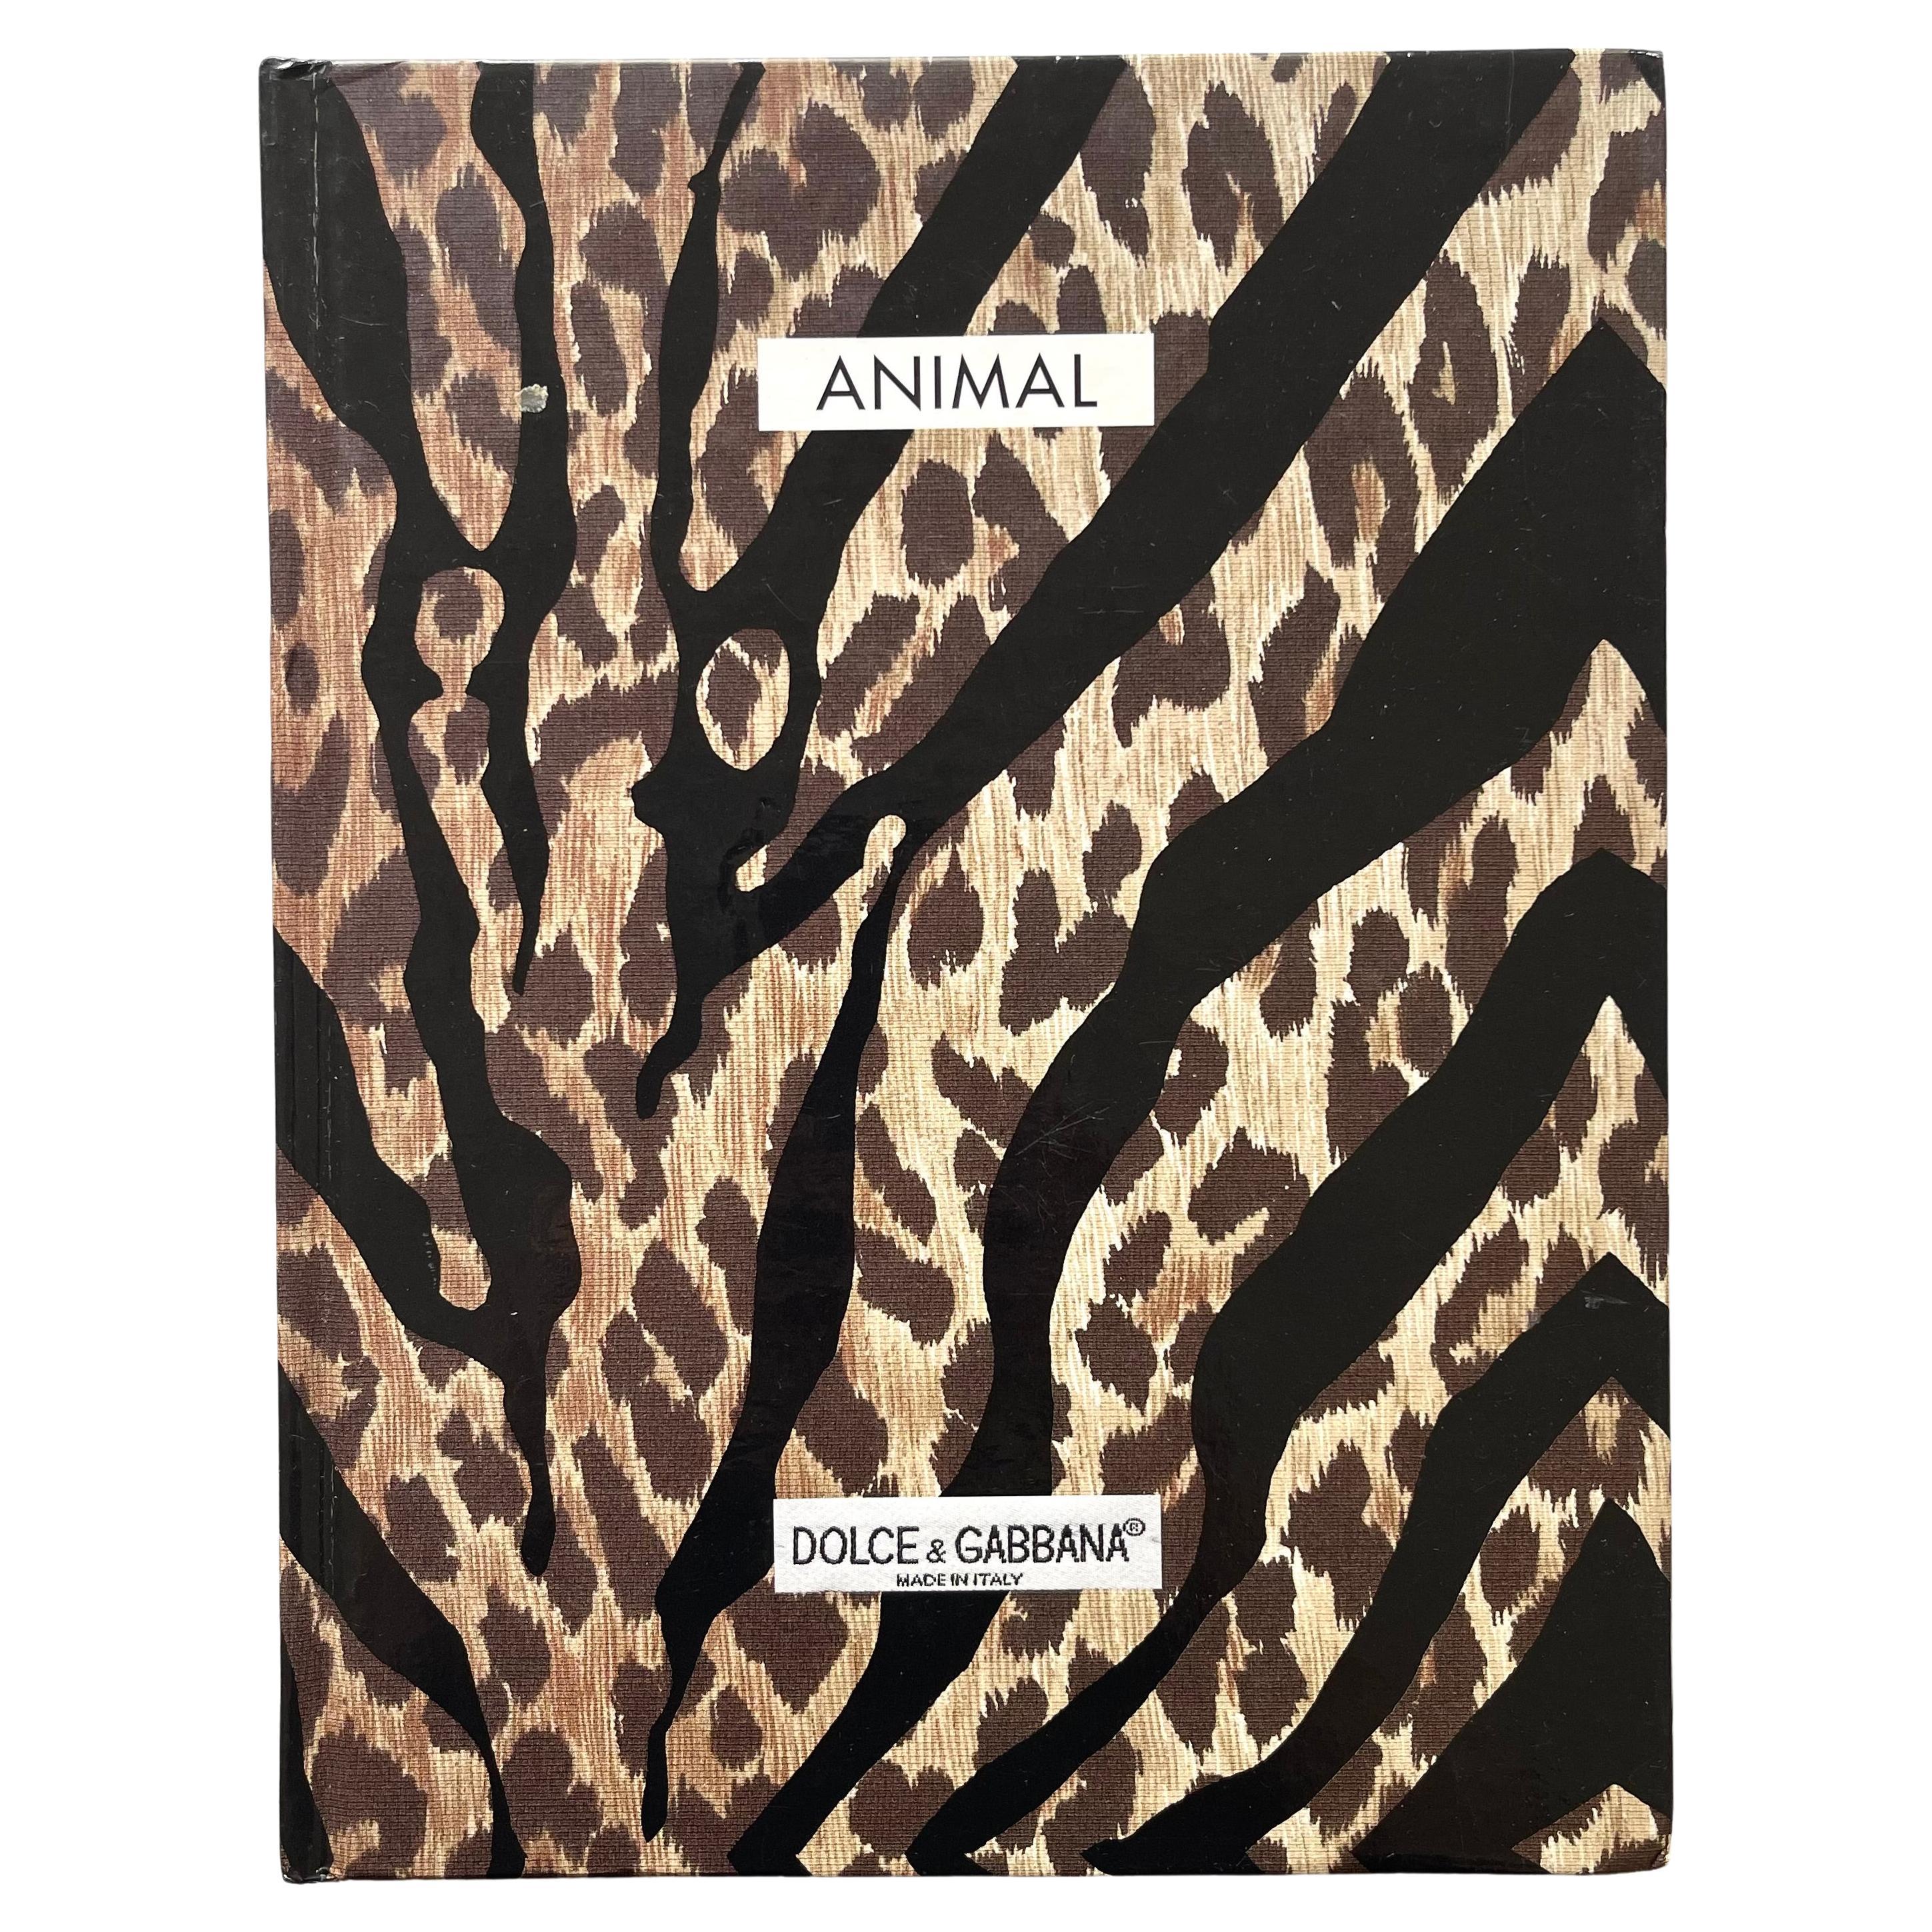 Dolce and Gabbana Animal 1st US edition 1998 (book) For Sale at 1stDibs